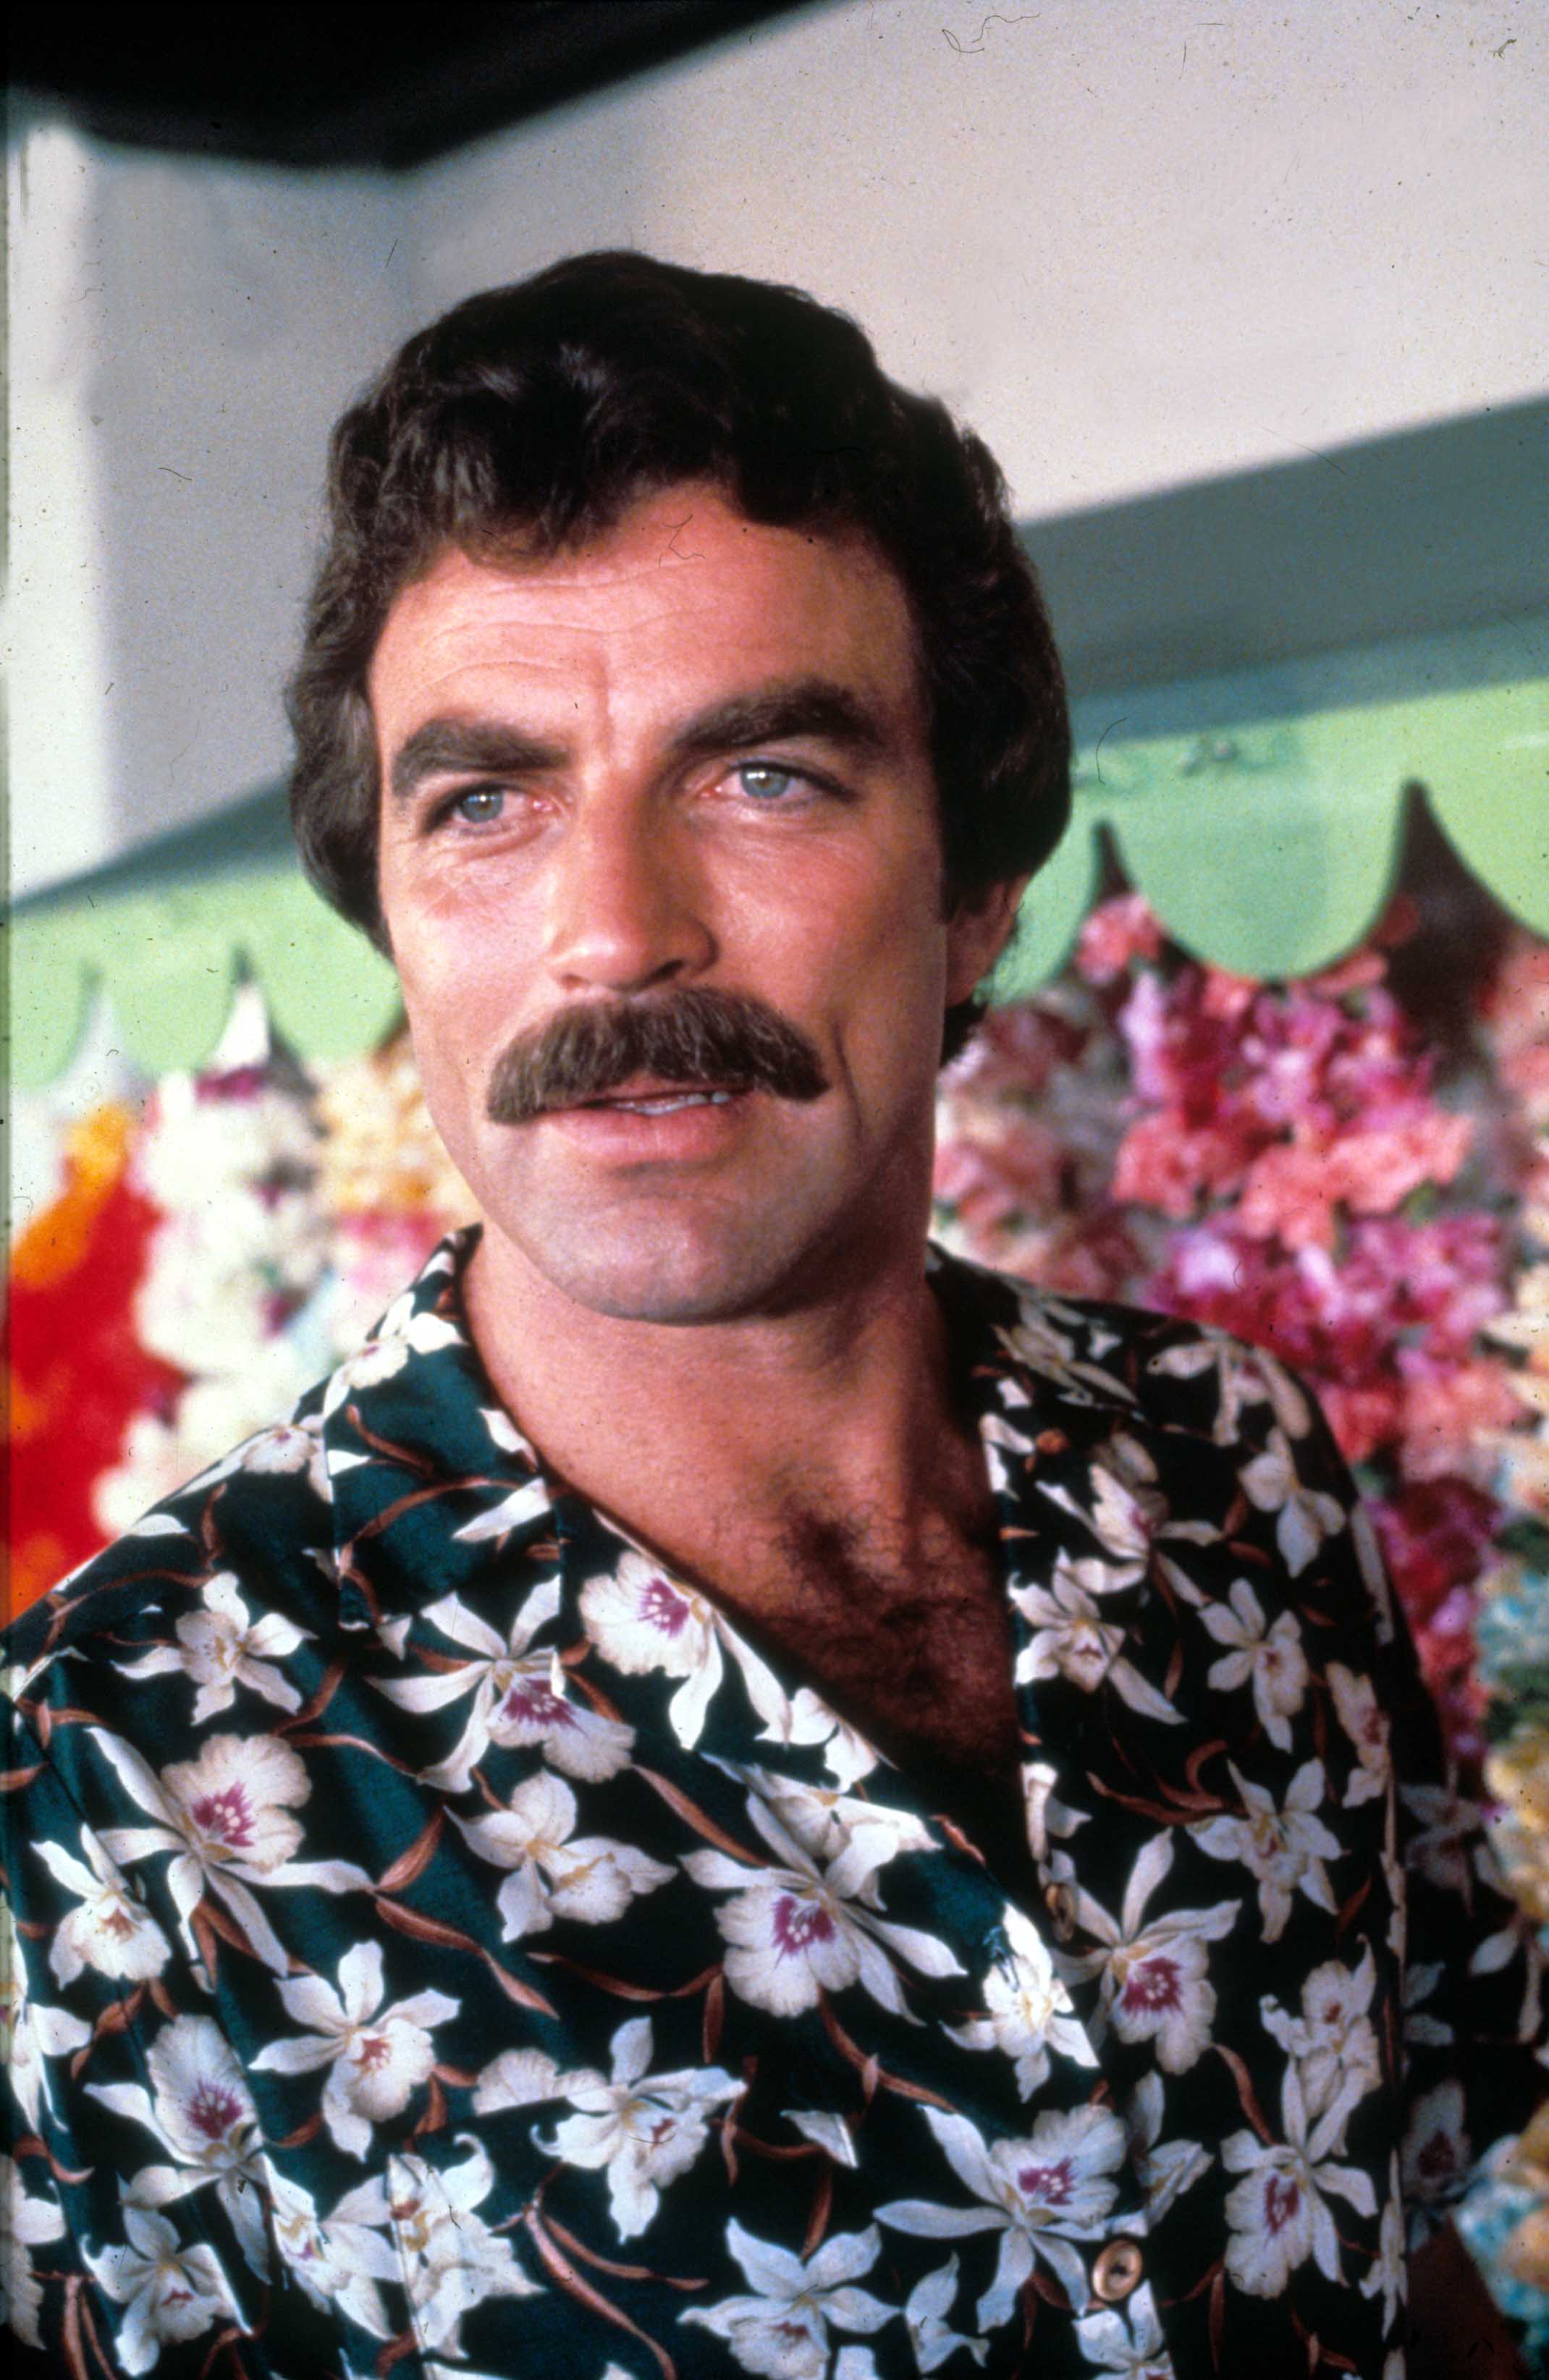 Tom Selleck Lives a 'Low-Key' Life Now, Is a 'Good Dad' to Kids ...